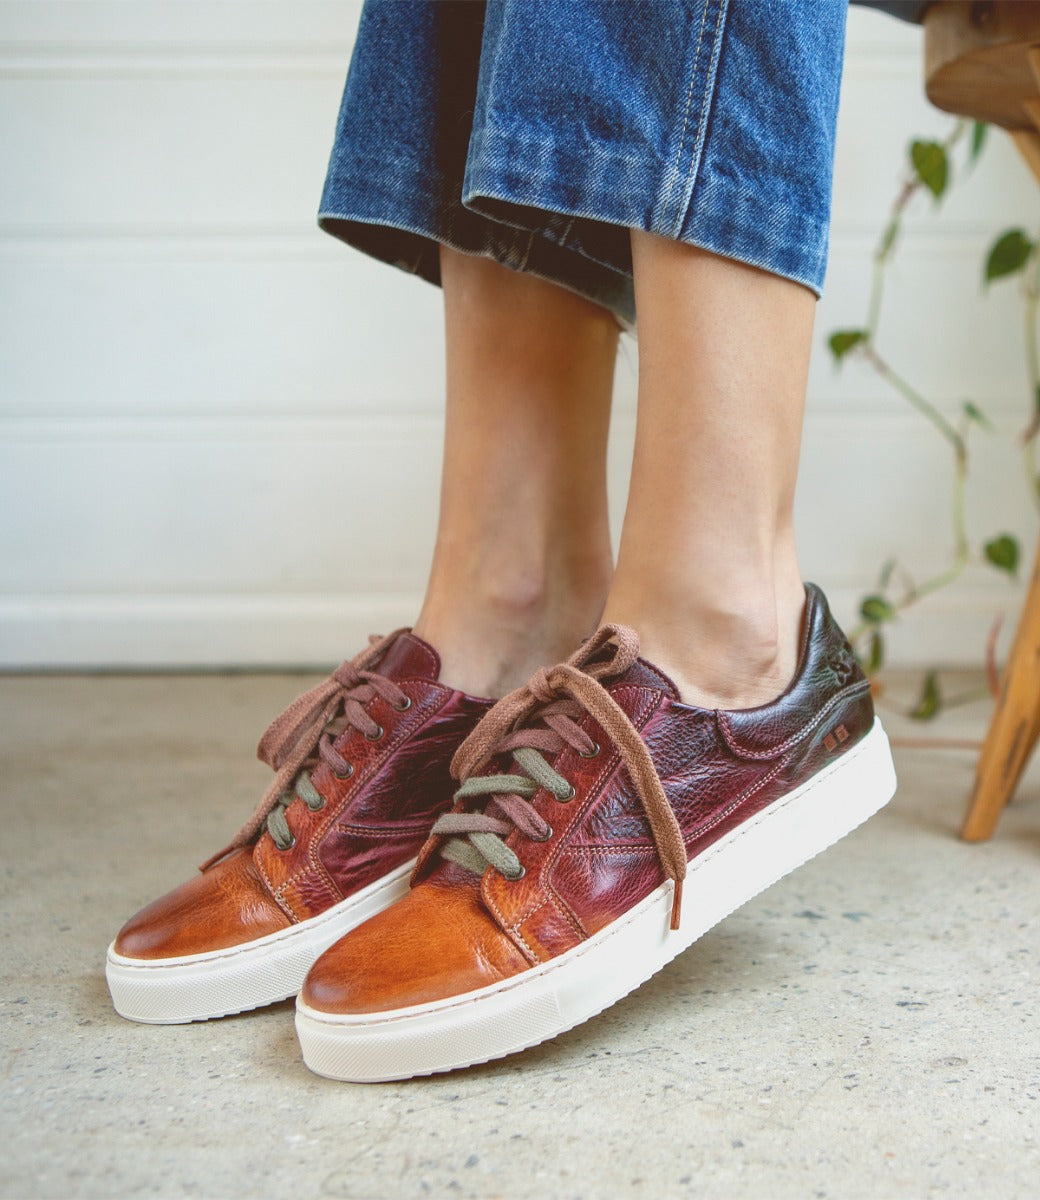 A woman wearing a pair of Bed Stu Azeli burgundy leather sneakers.